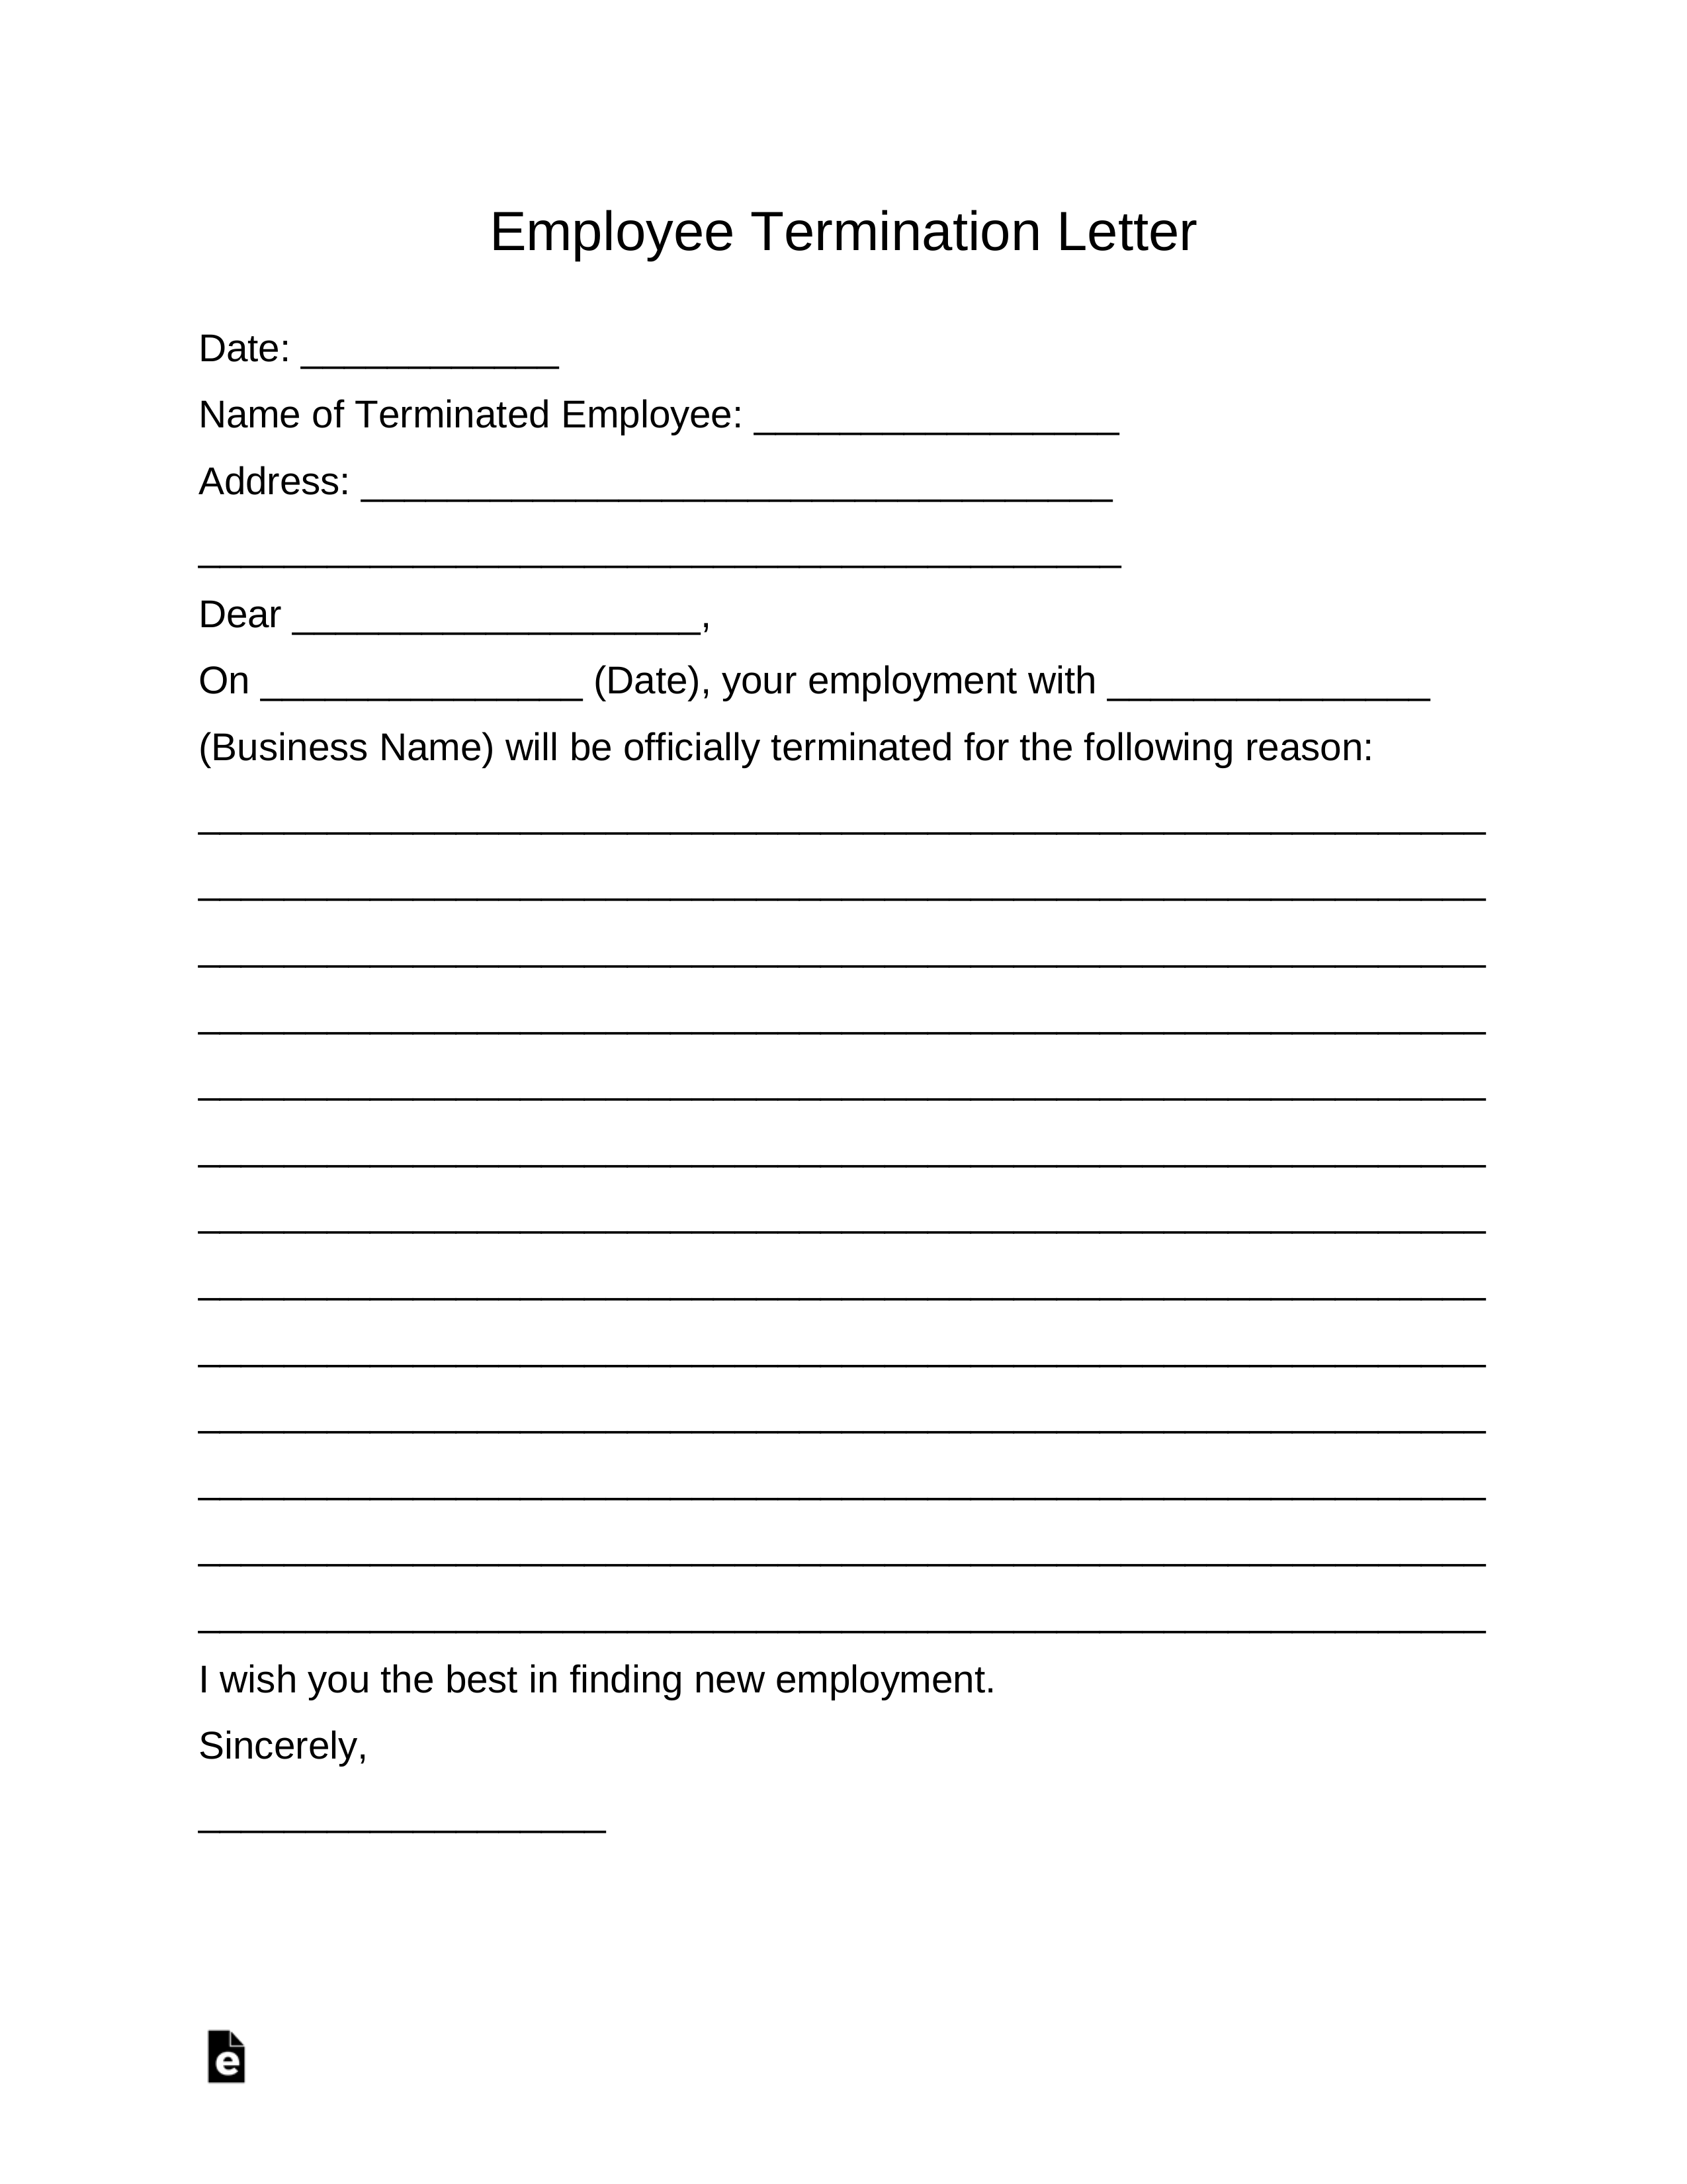 Wrongful Termination Letter To Employer from eforms.com